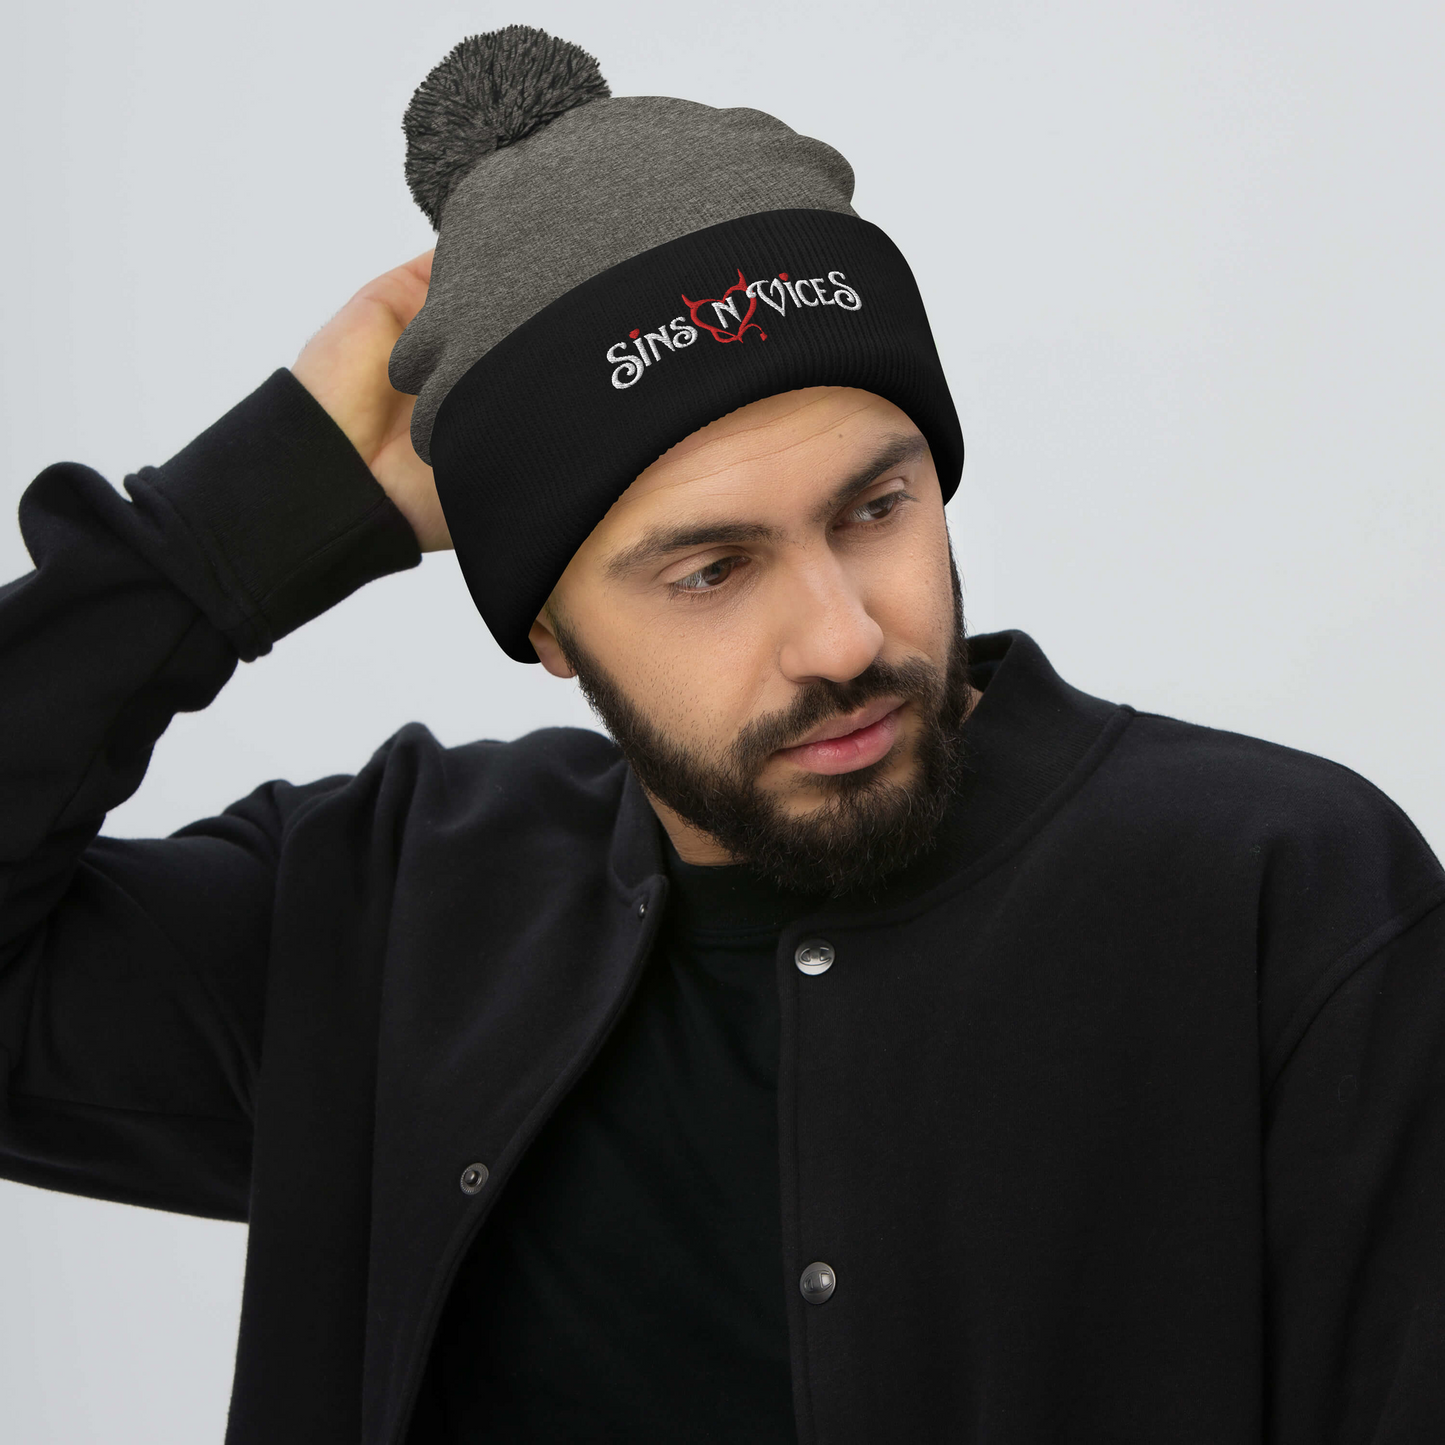 embroidered beanie